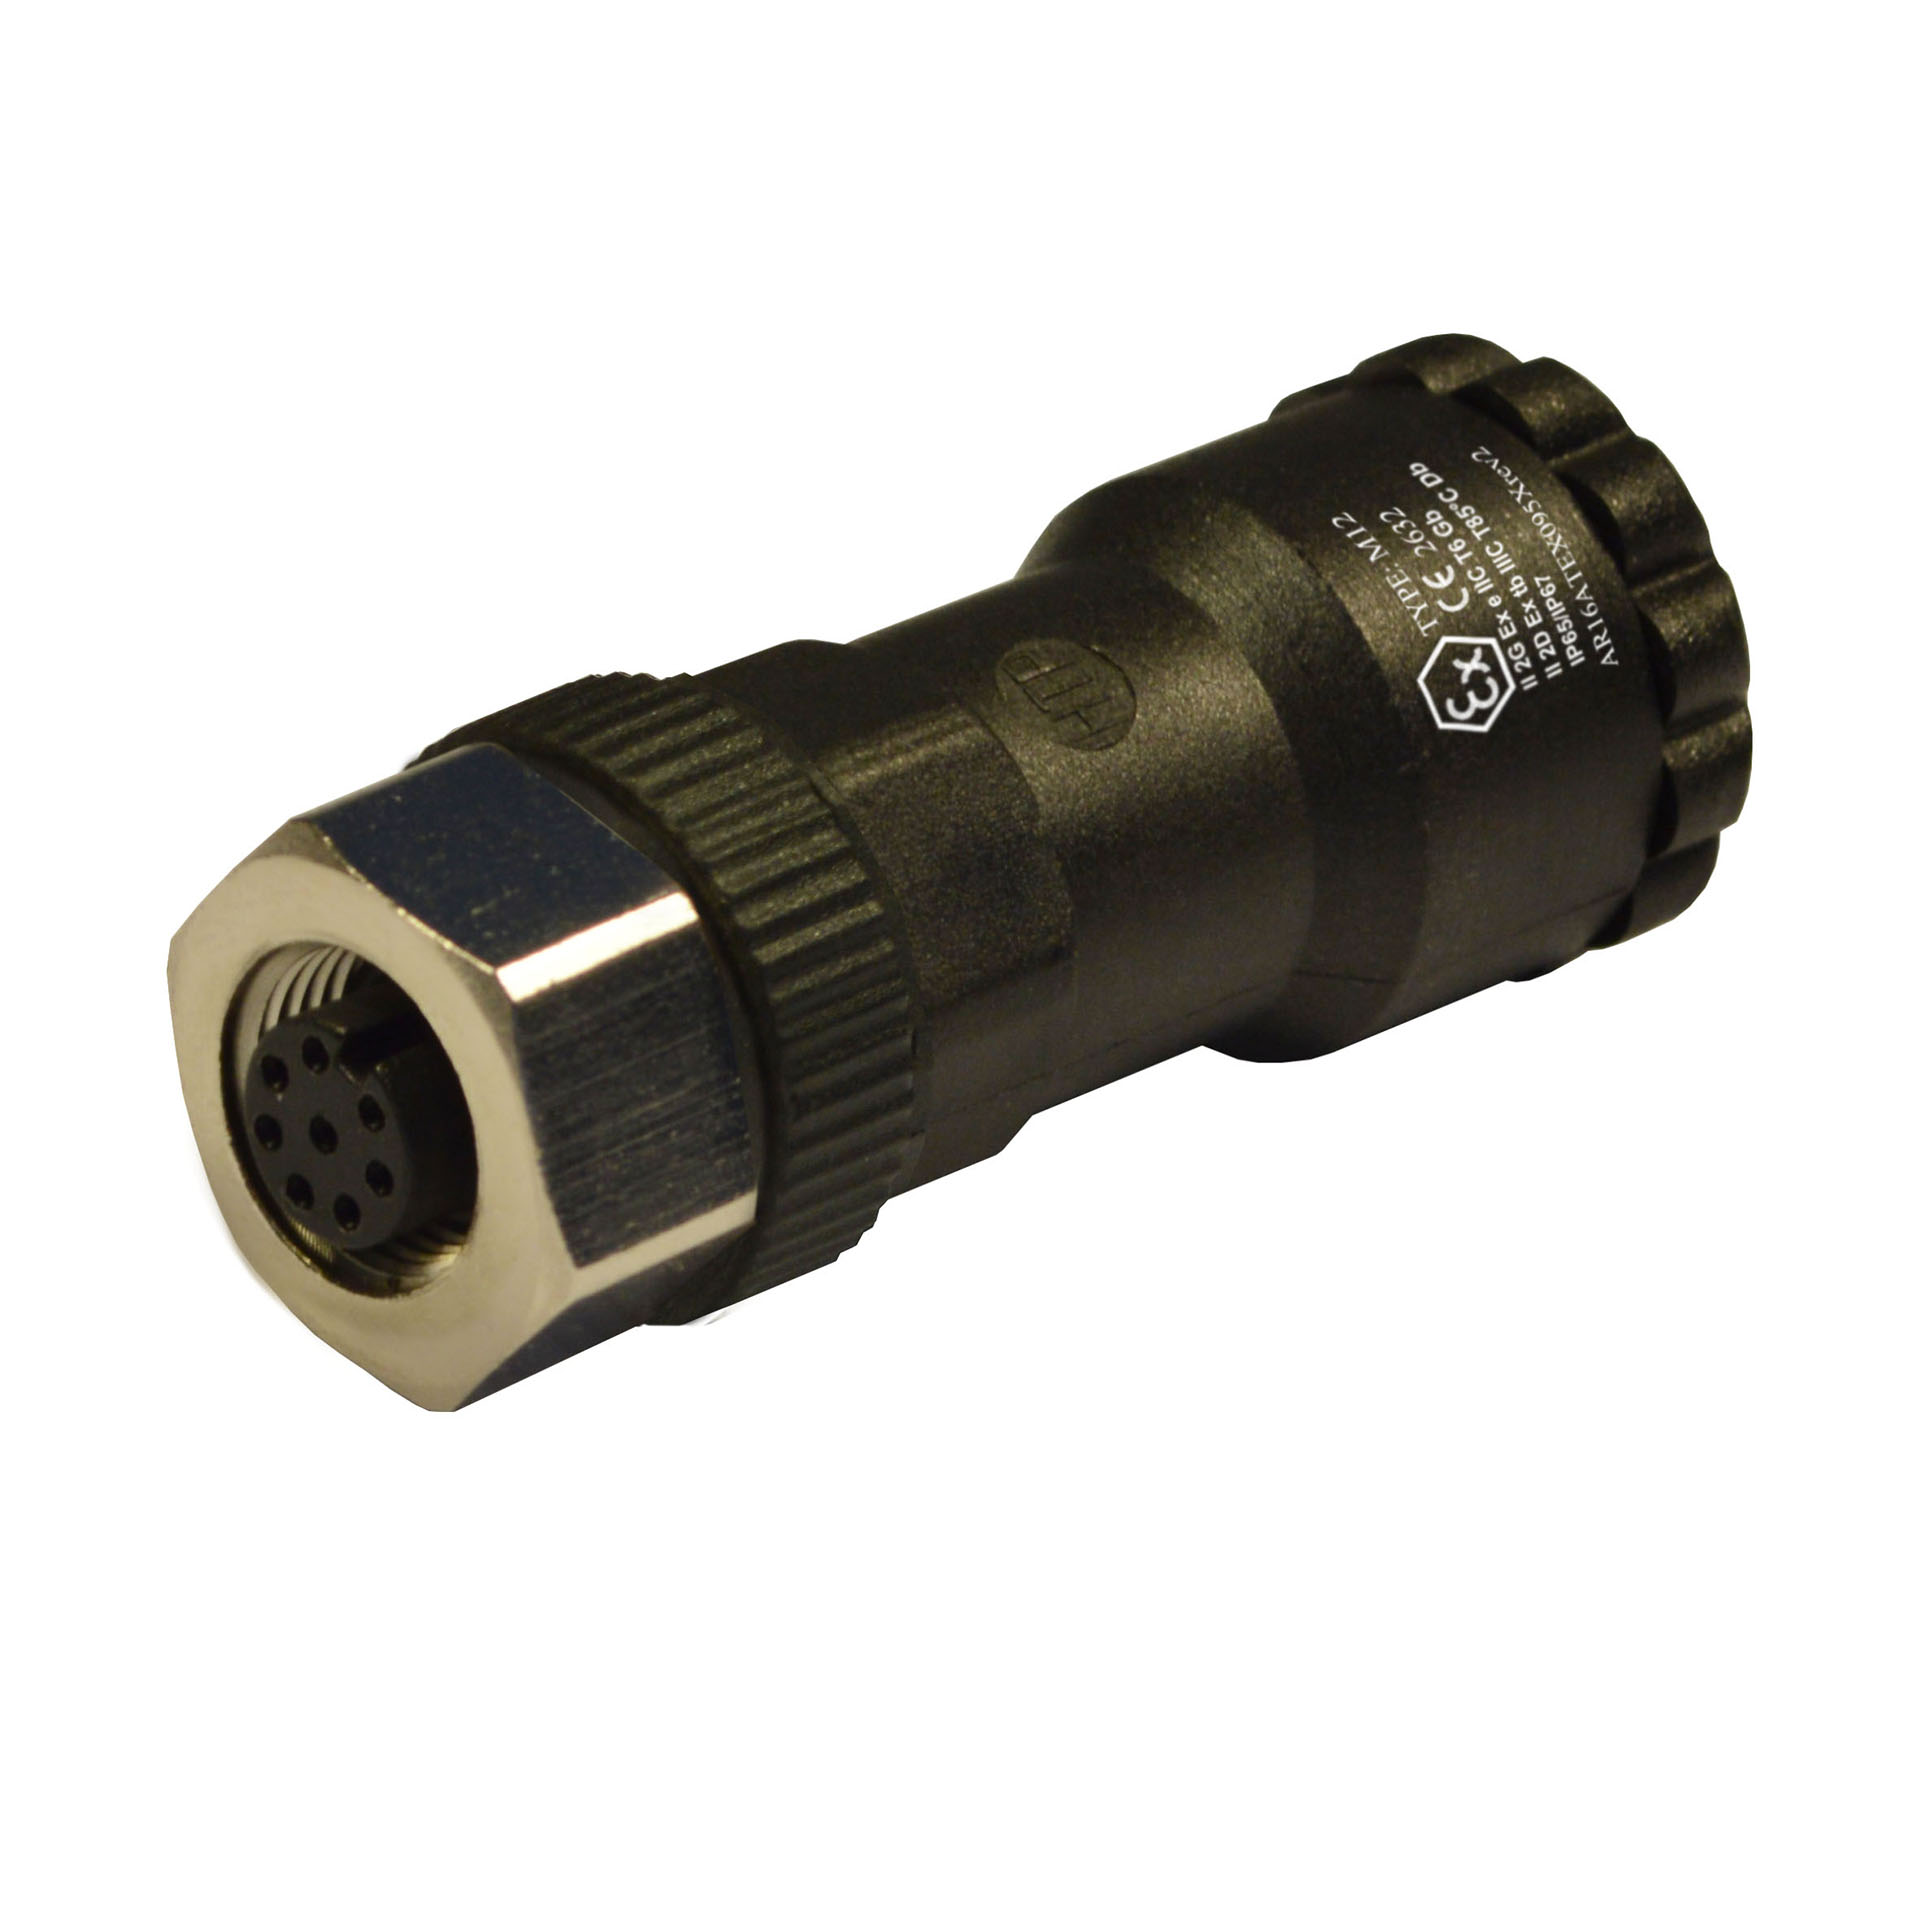 M12 field attachable,female,180°,8p.,PG9/11unif.or double exit cable, ATEX conform.